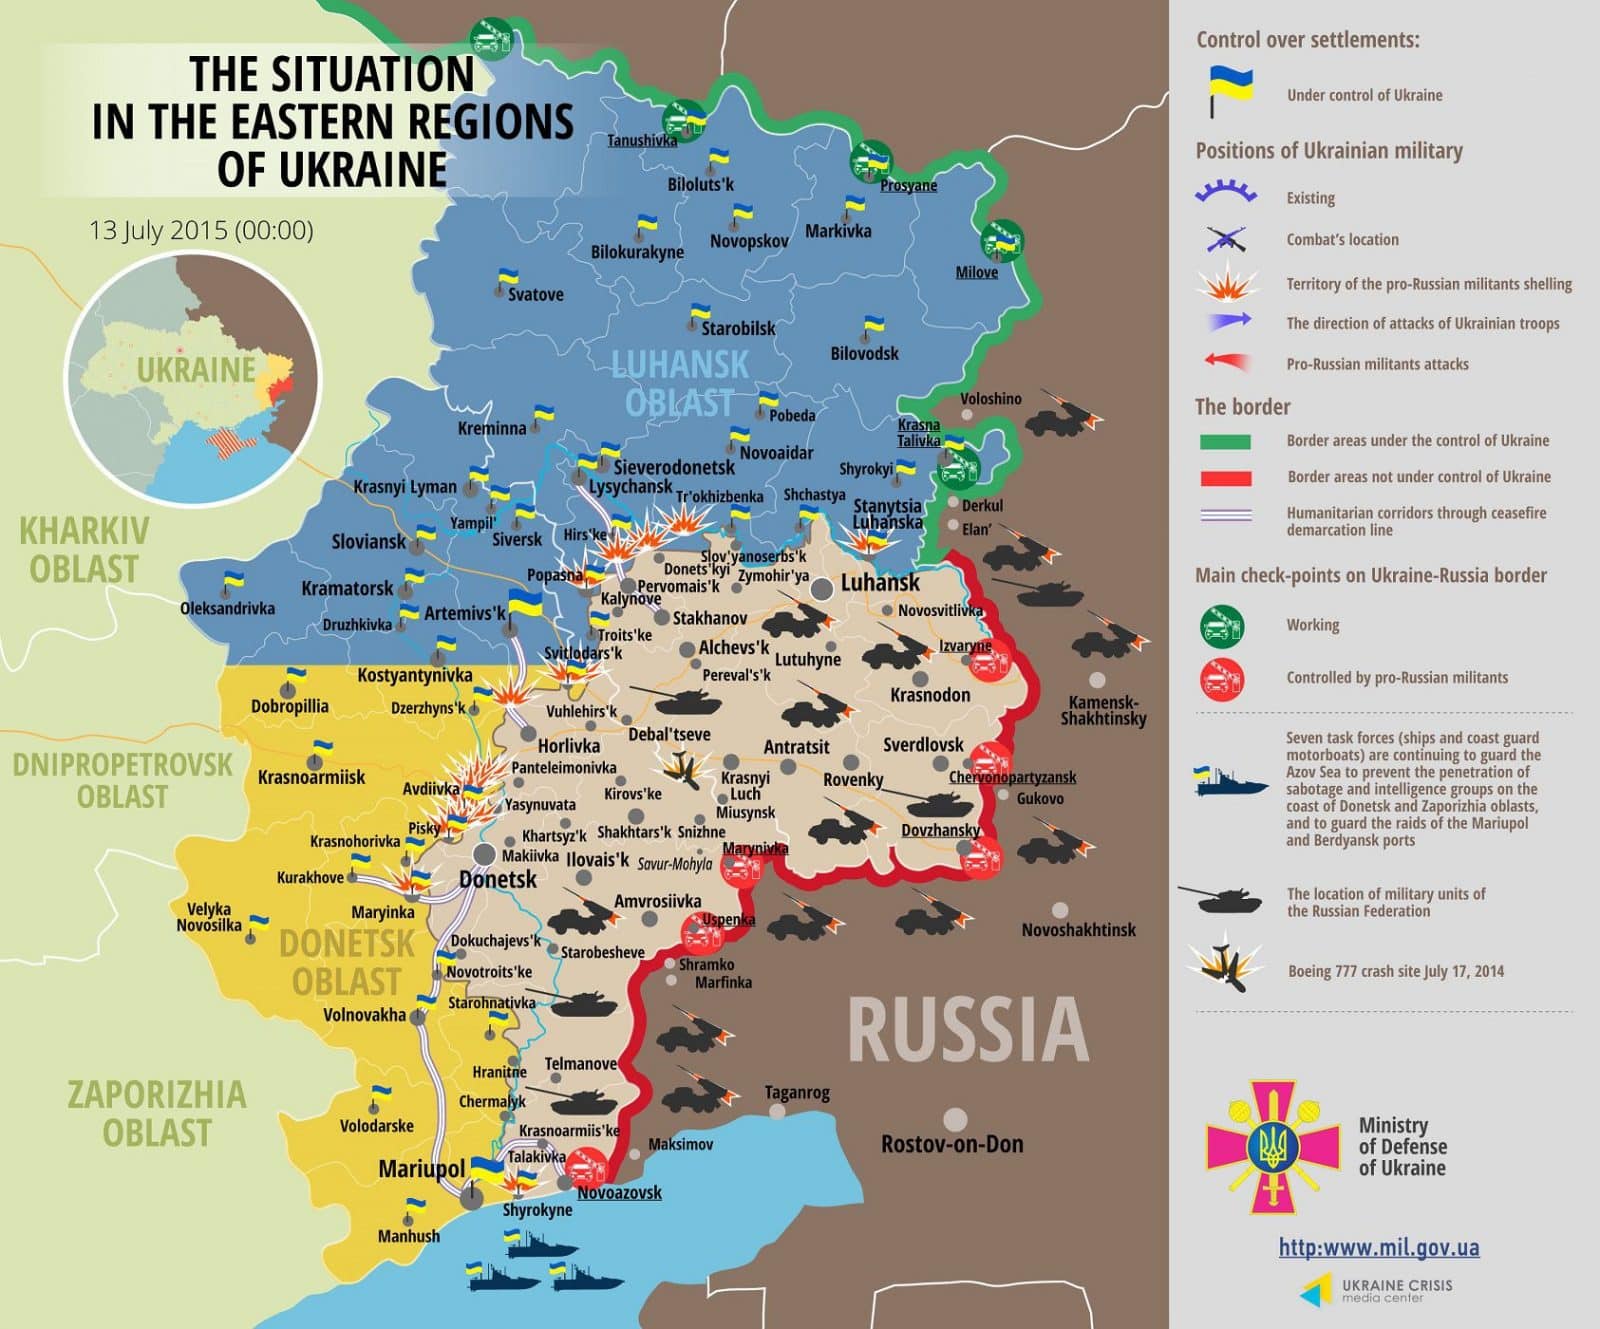 NSDC: militant shelling near Mariupol subsides. Ukrainian troops suffer no casualties